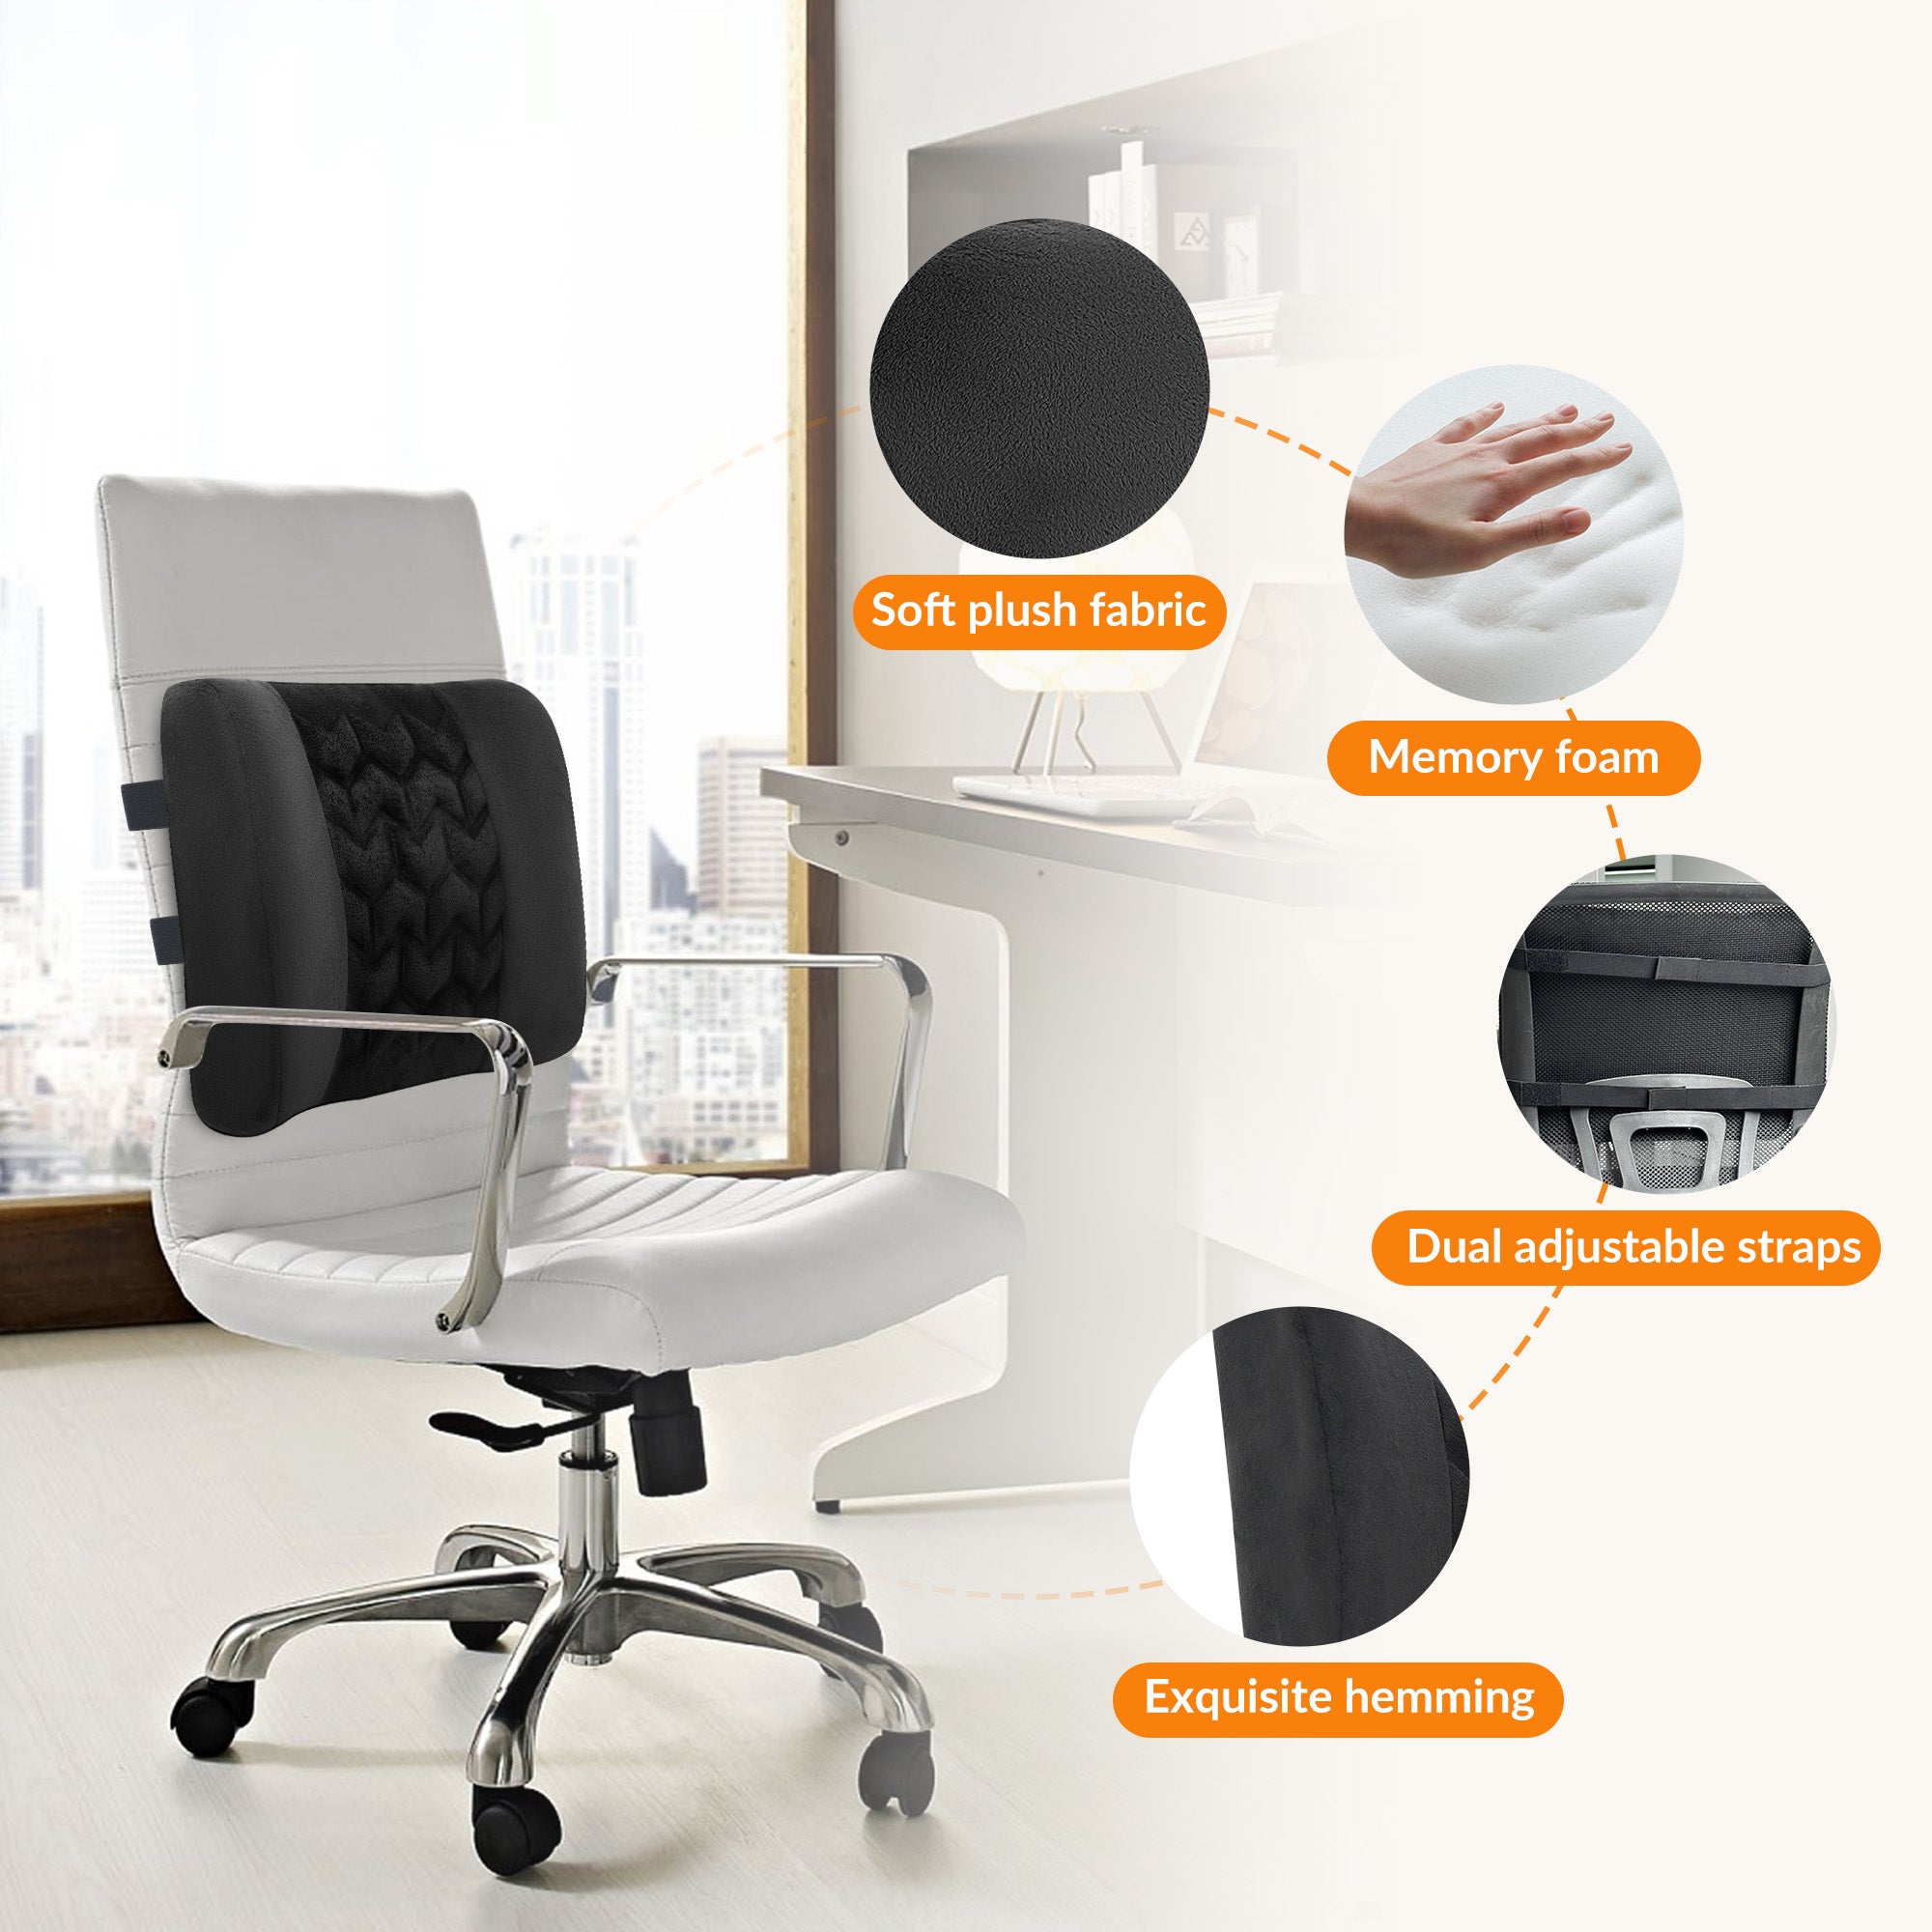 ADJUSTABLE LUMBAR SUPPORT PILLOW MEMORY FOAM CUSHION FOR OFFICE